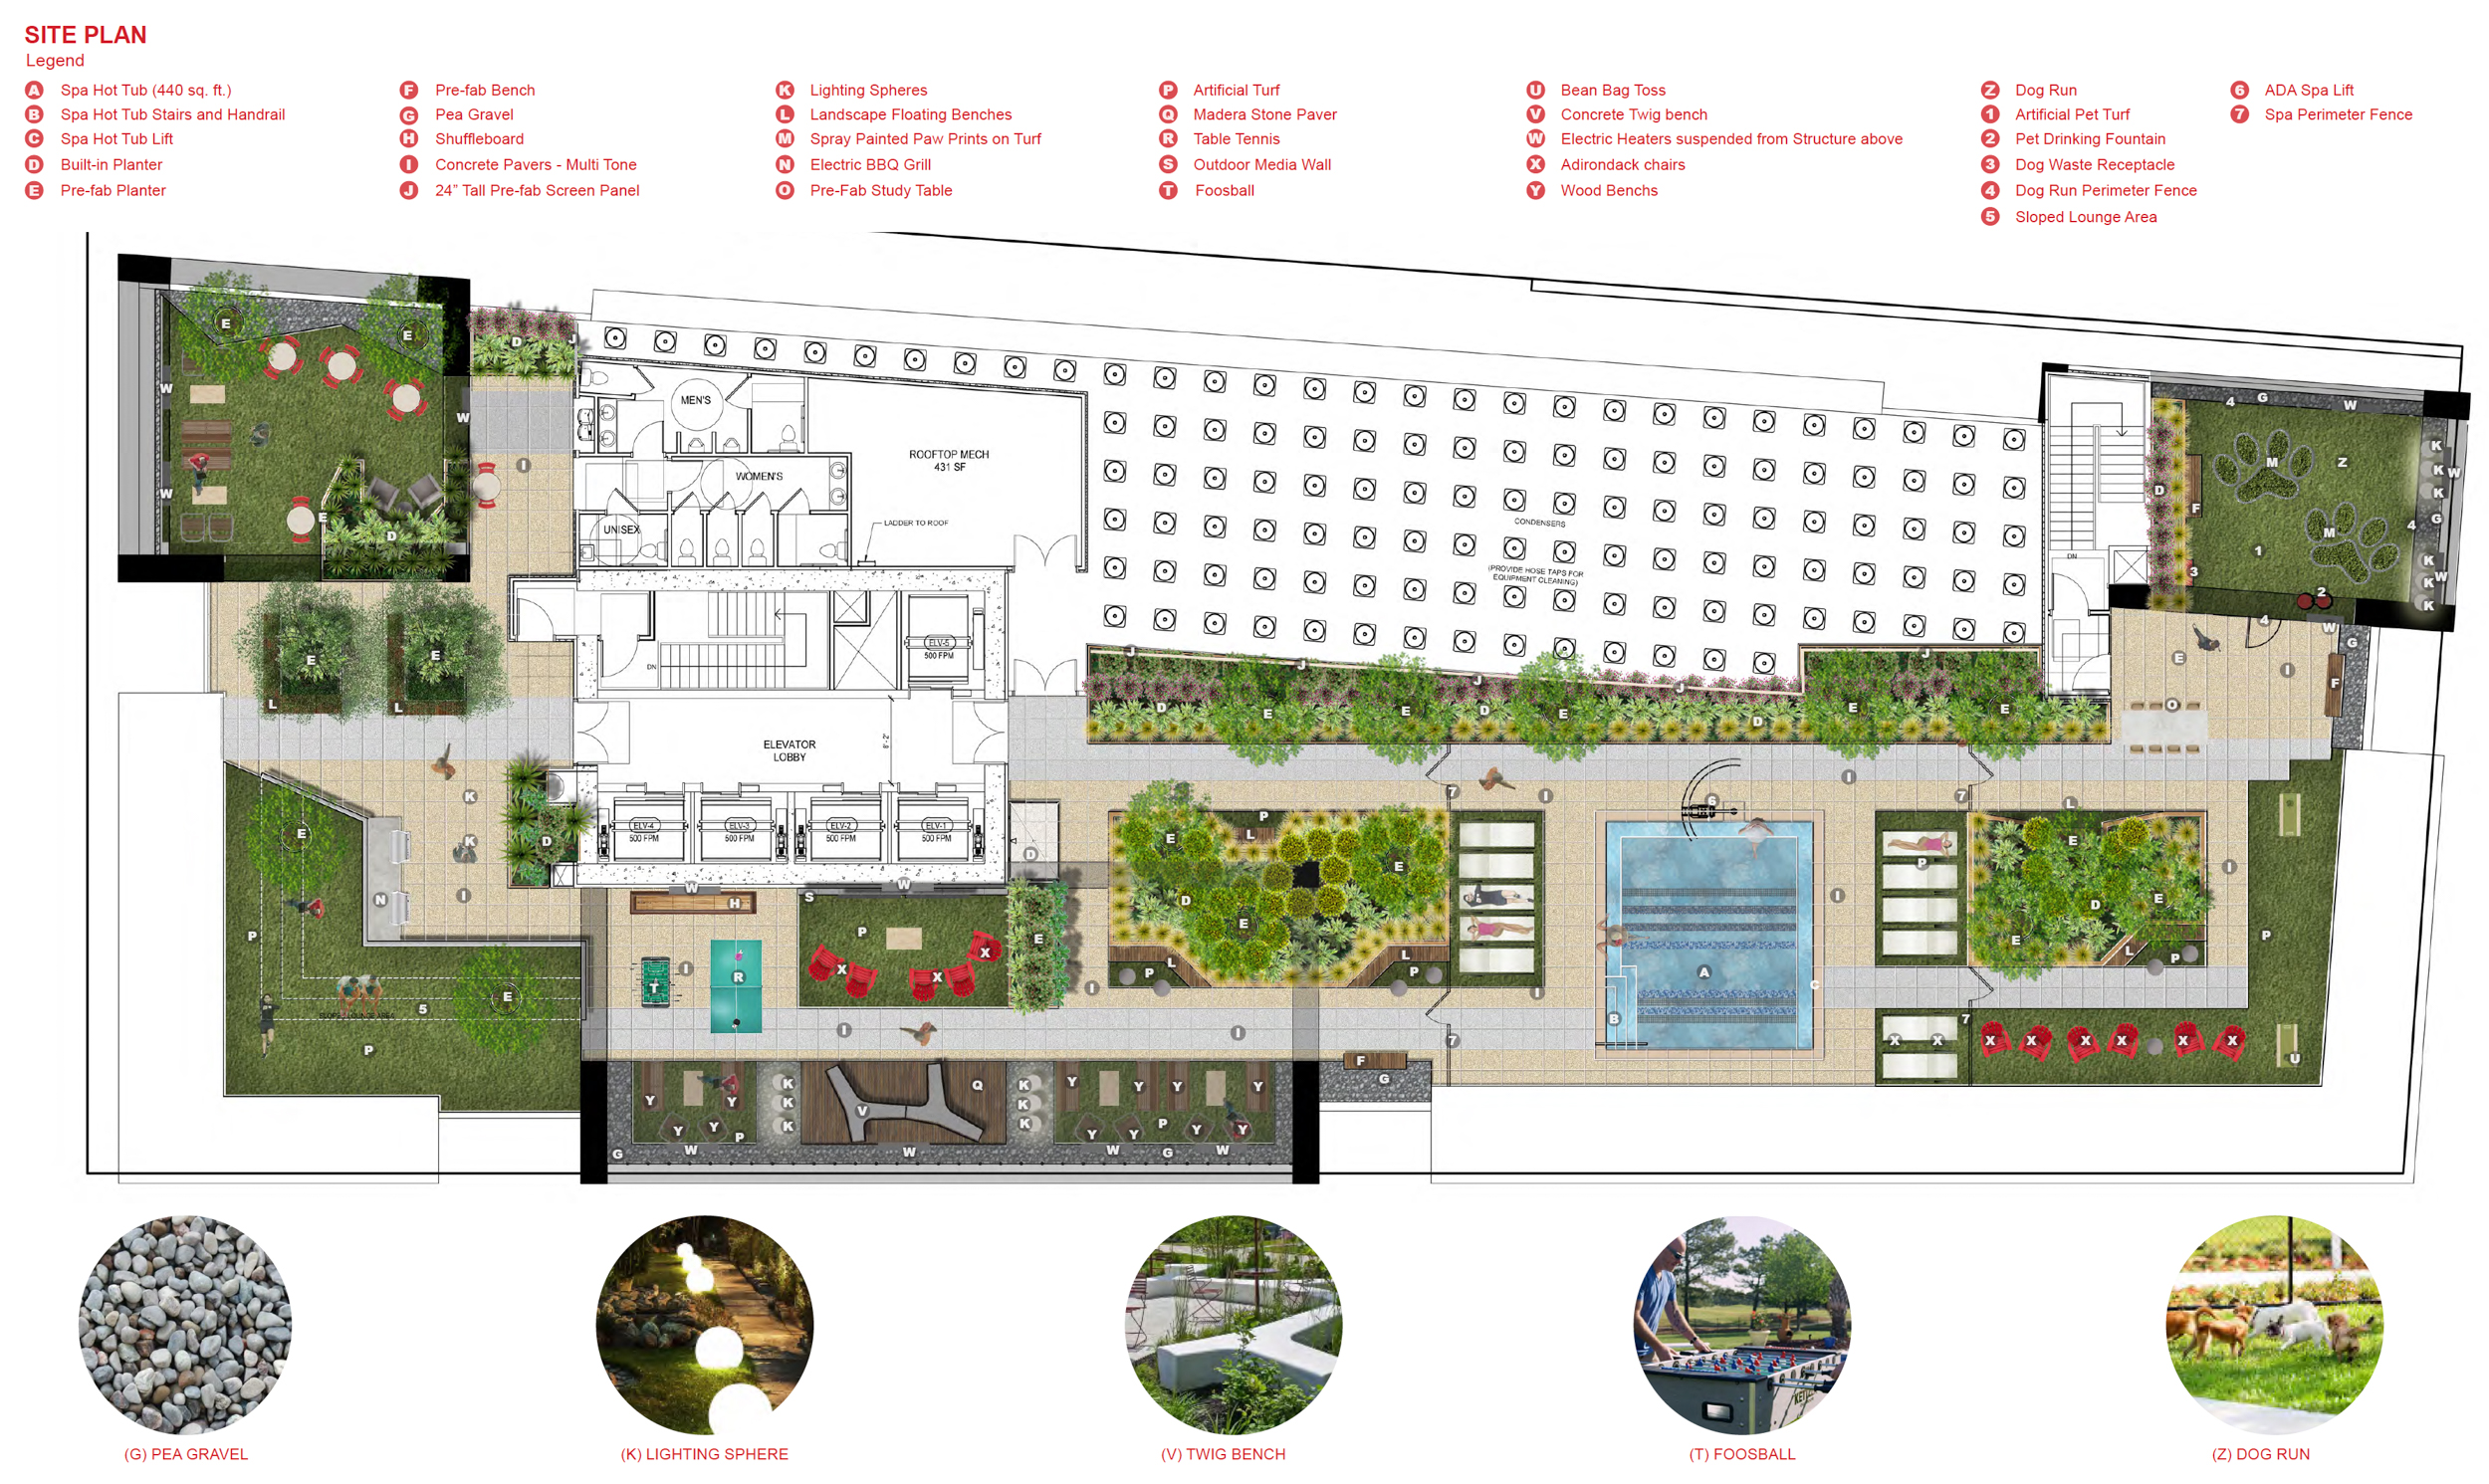 2190 Shattuck Avenue rooftop landscaping, rendering by Trachtenberg Architects